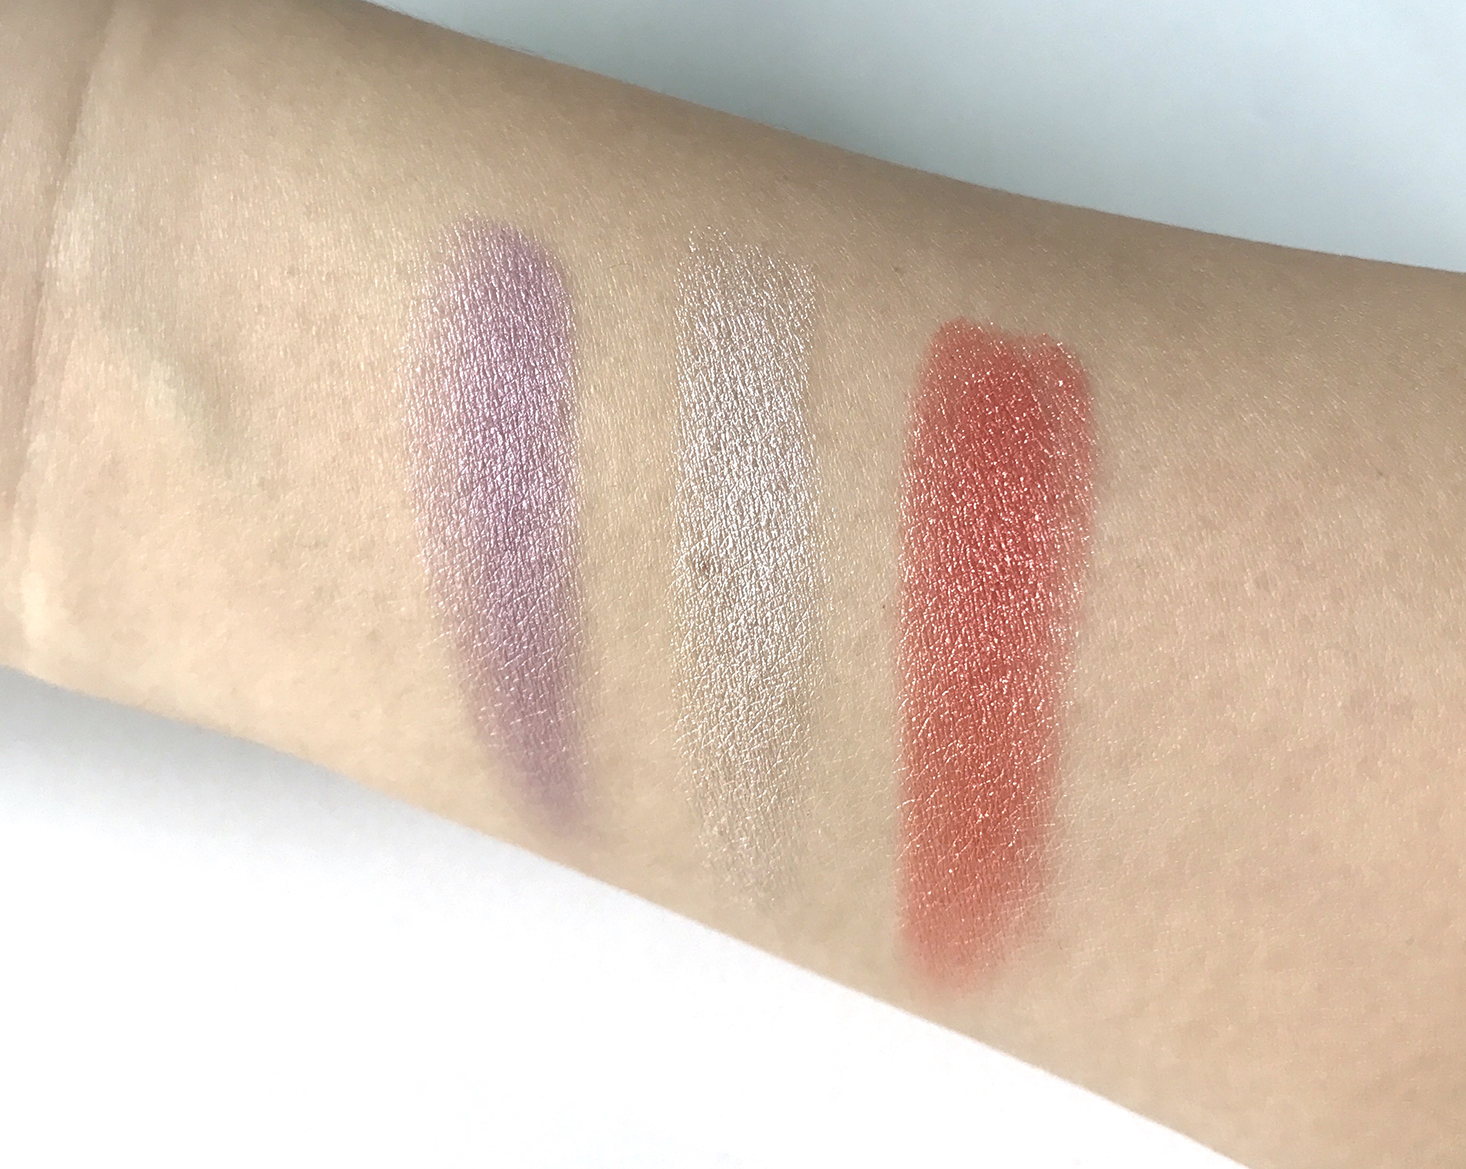 LuxePineapple-Post-April-2017-Eyeshadow-Swatches